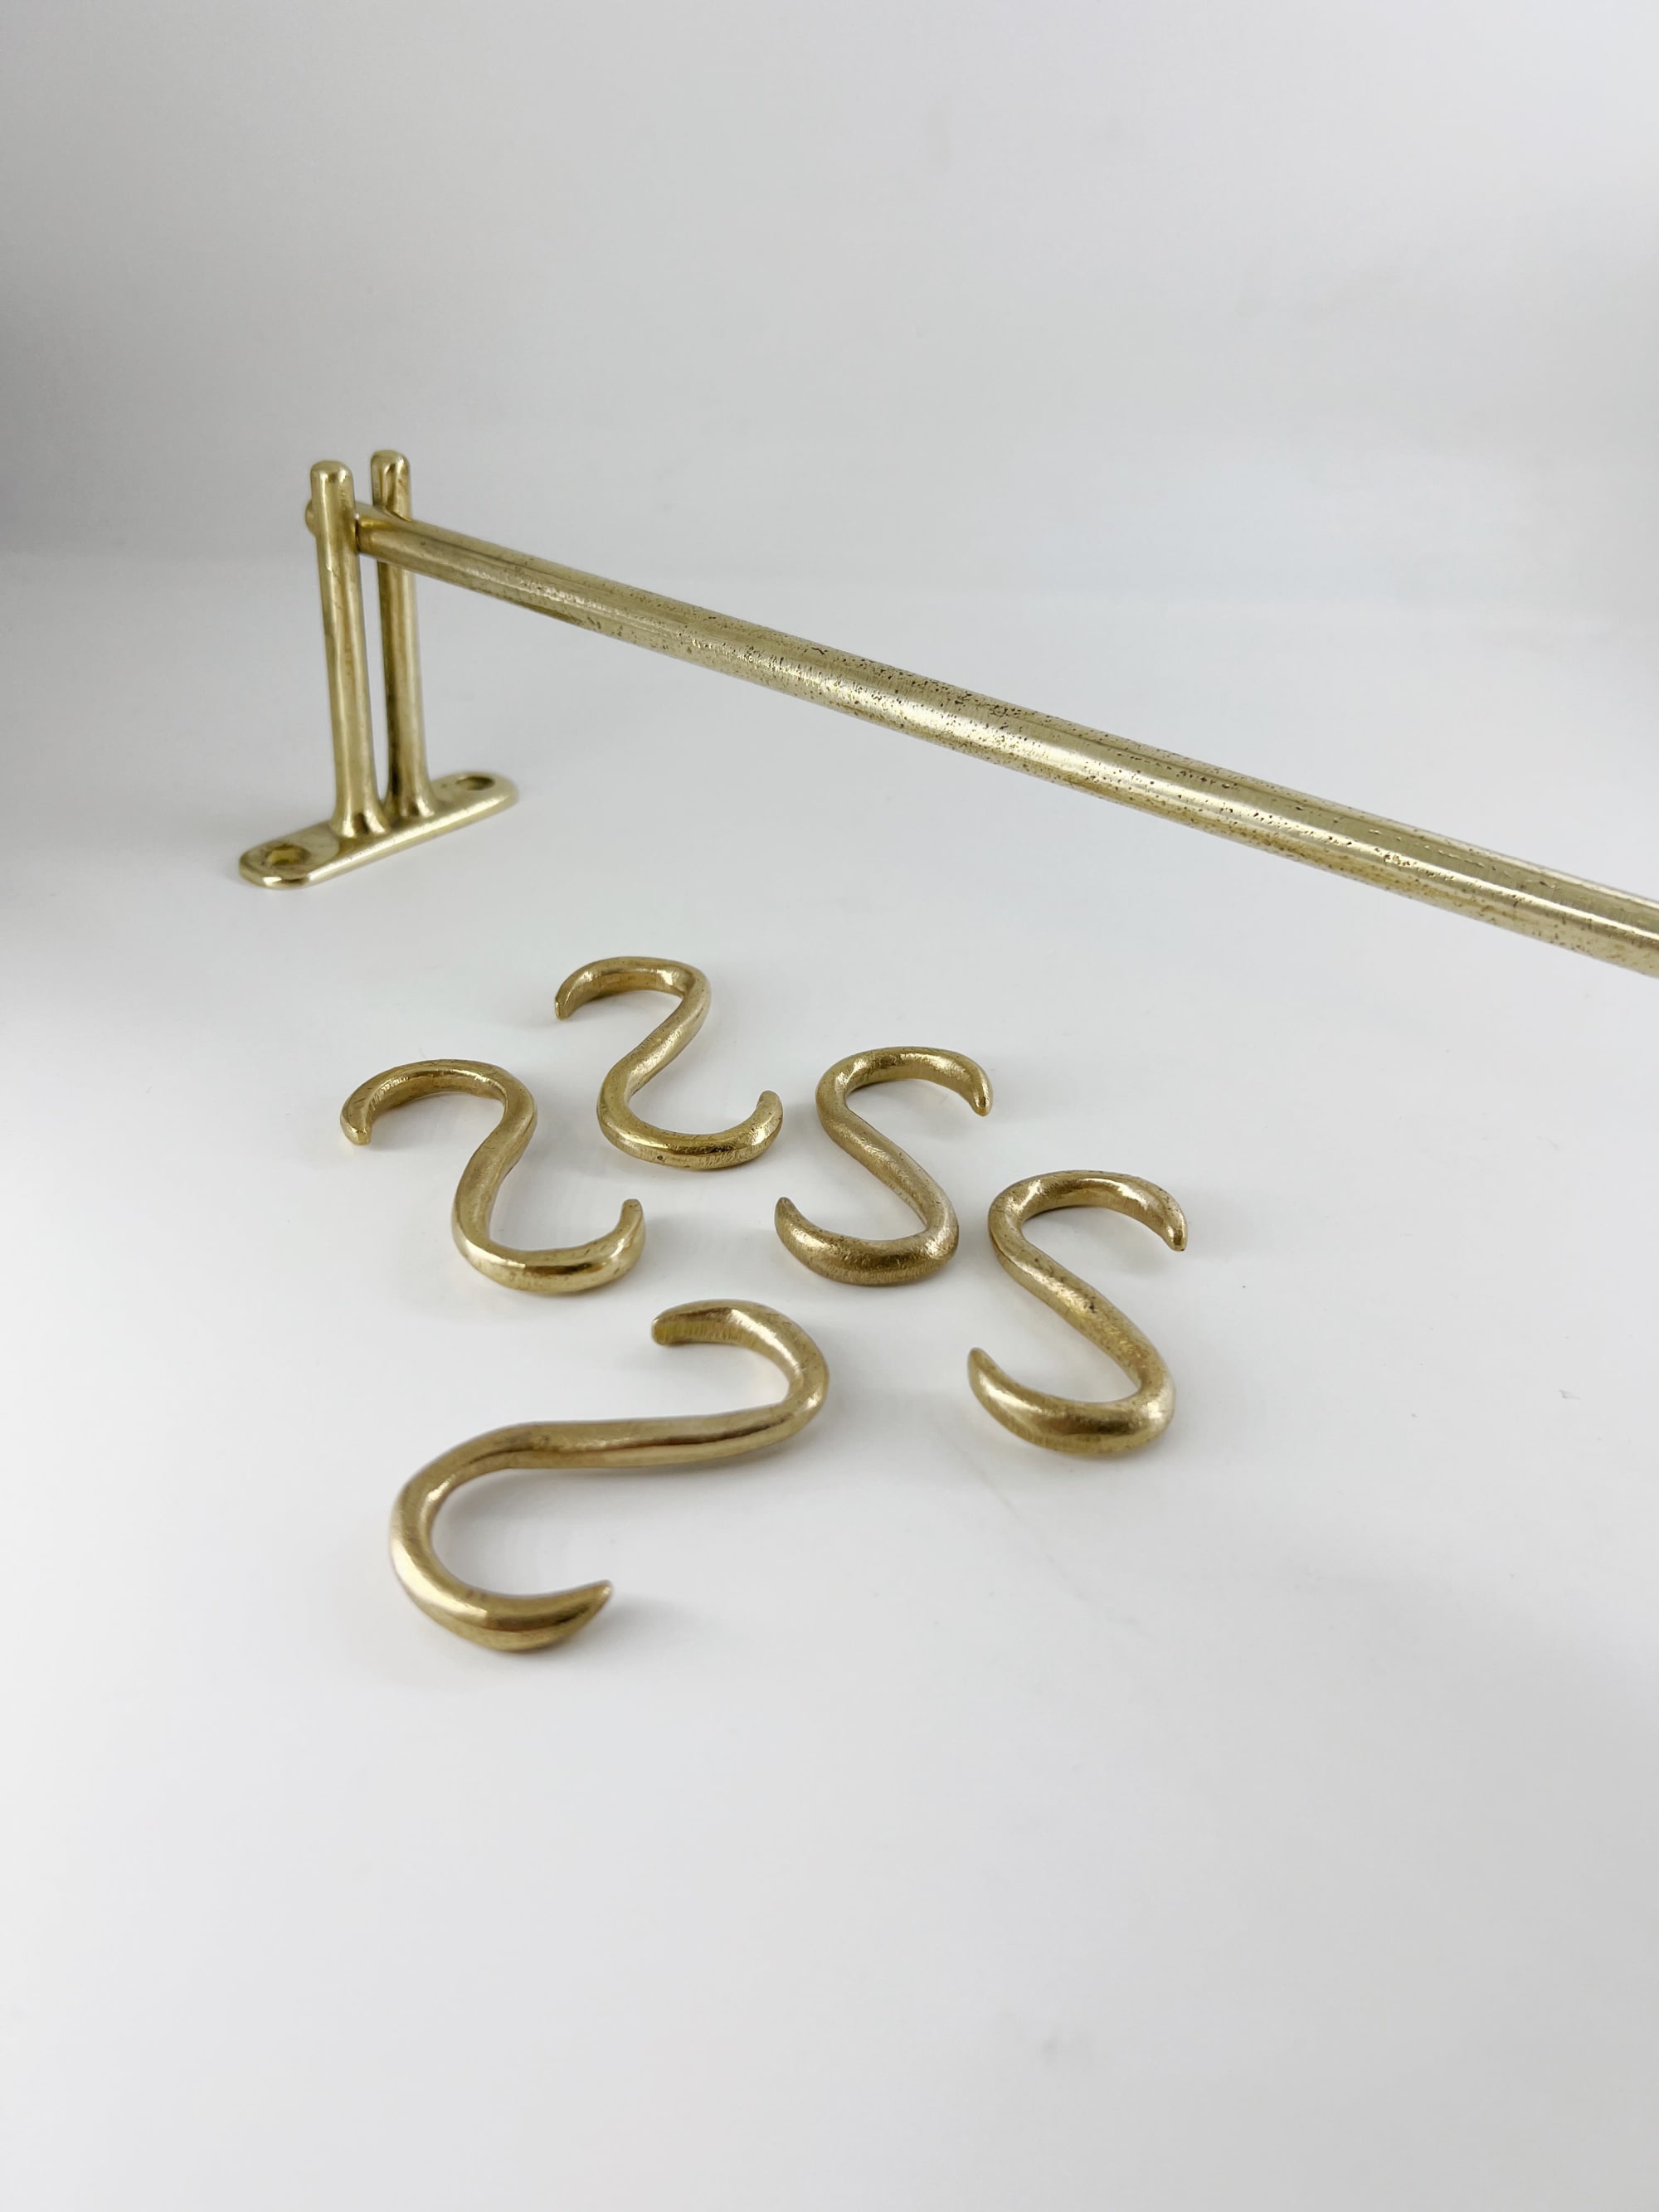 Bathroom & Kitchen Hanging Rail With 5 Hooks N01 - 18 Inches by